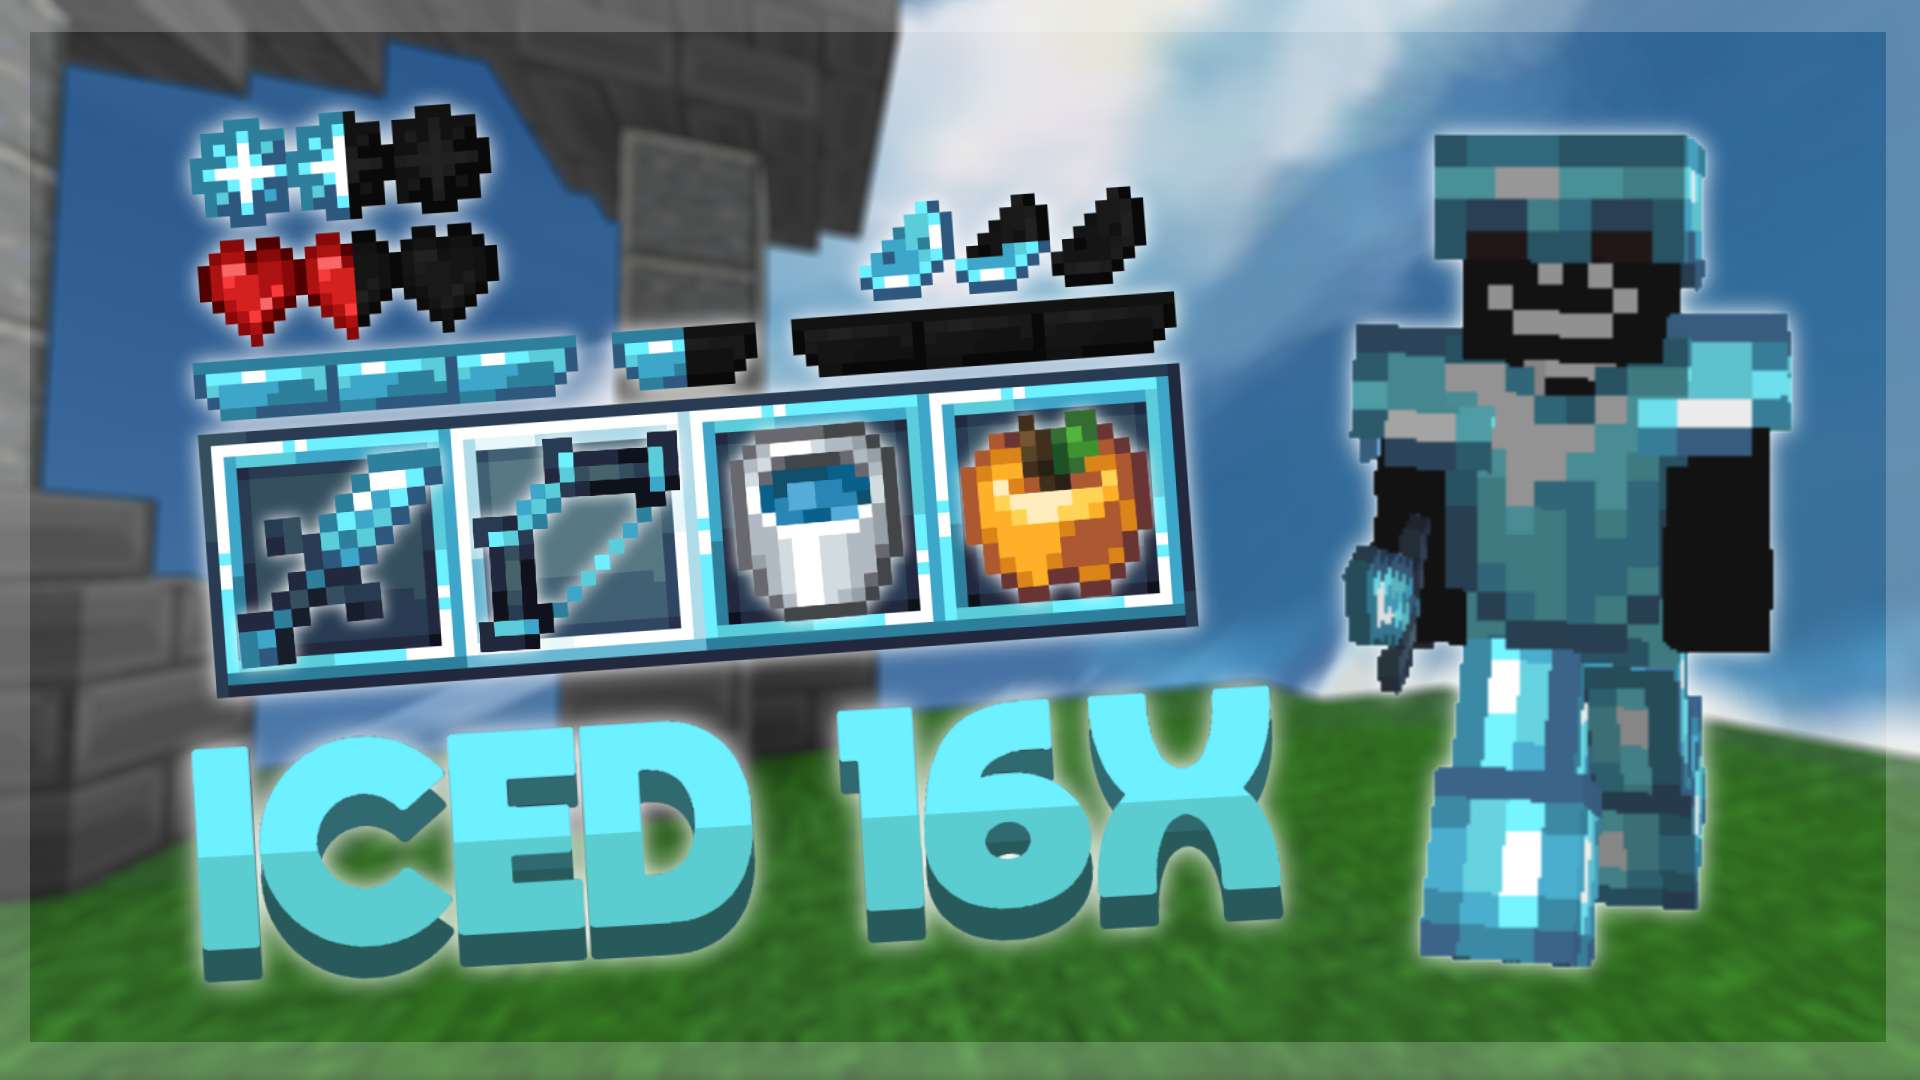 Iced 16x 16 by Bedwur on PvPRP